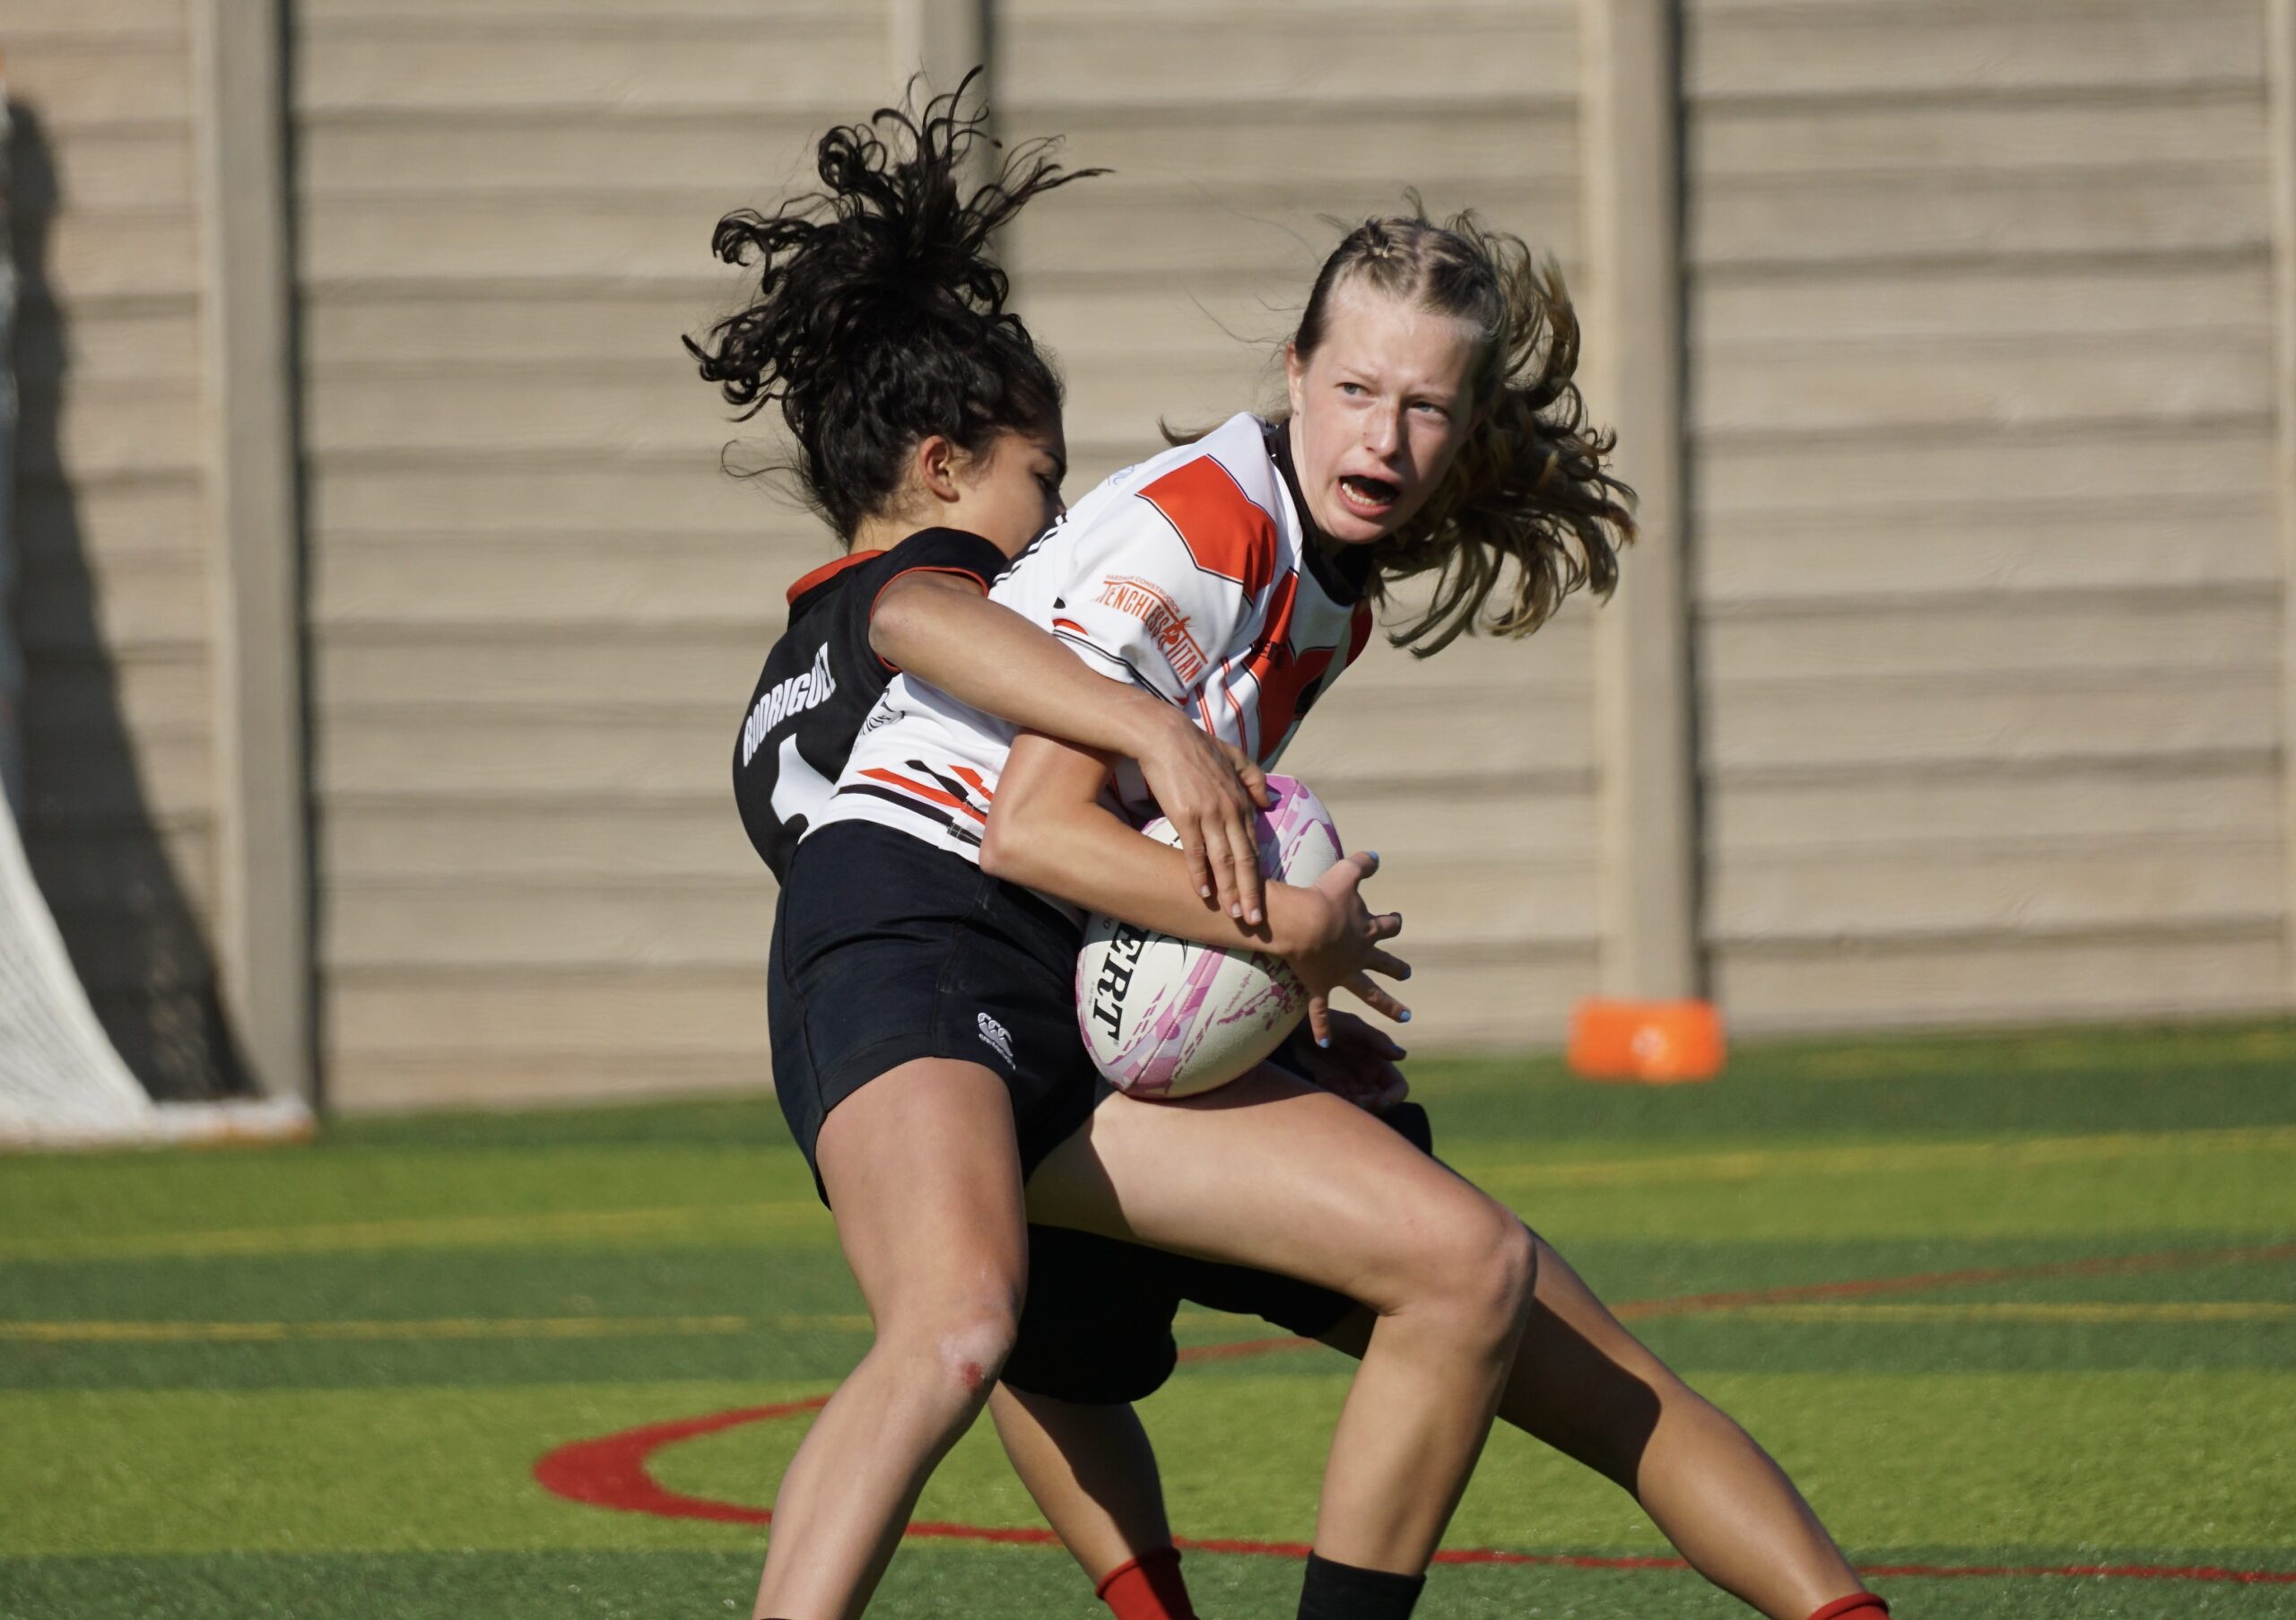 Marin rugby